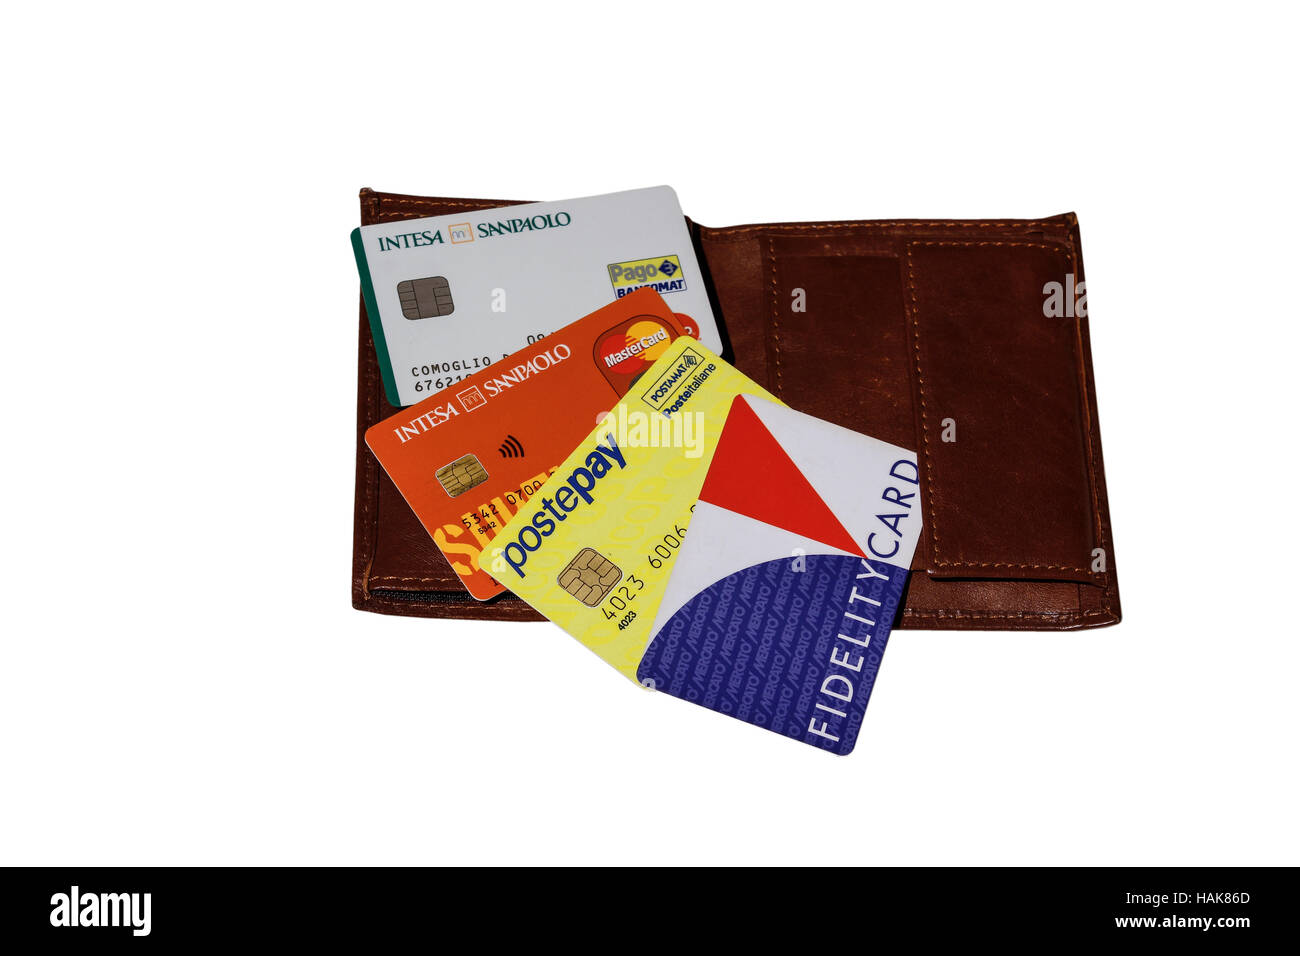 Credit cards and supermarket fidelity cards in front of a wallet Stock Photo